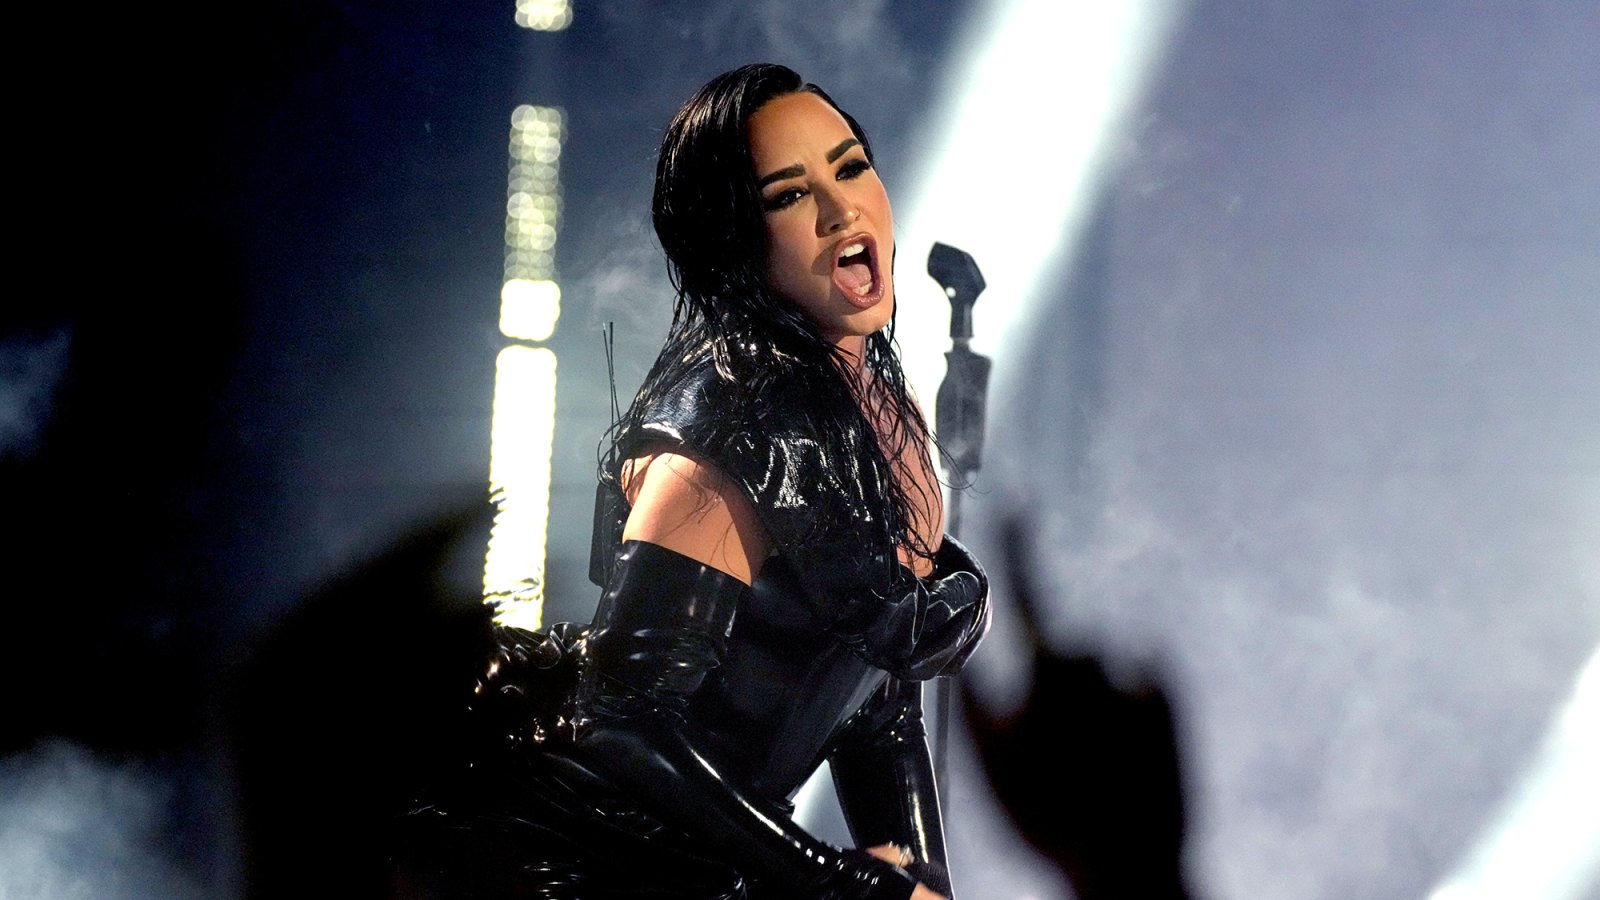 Demi Lovato Rocks Out With Alternative Medley of Her Hit Songs at the 2023 MTV Video Music Awards